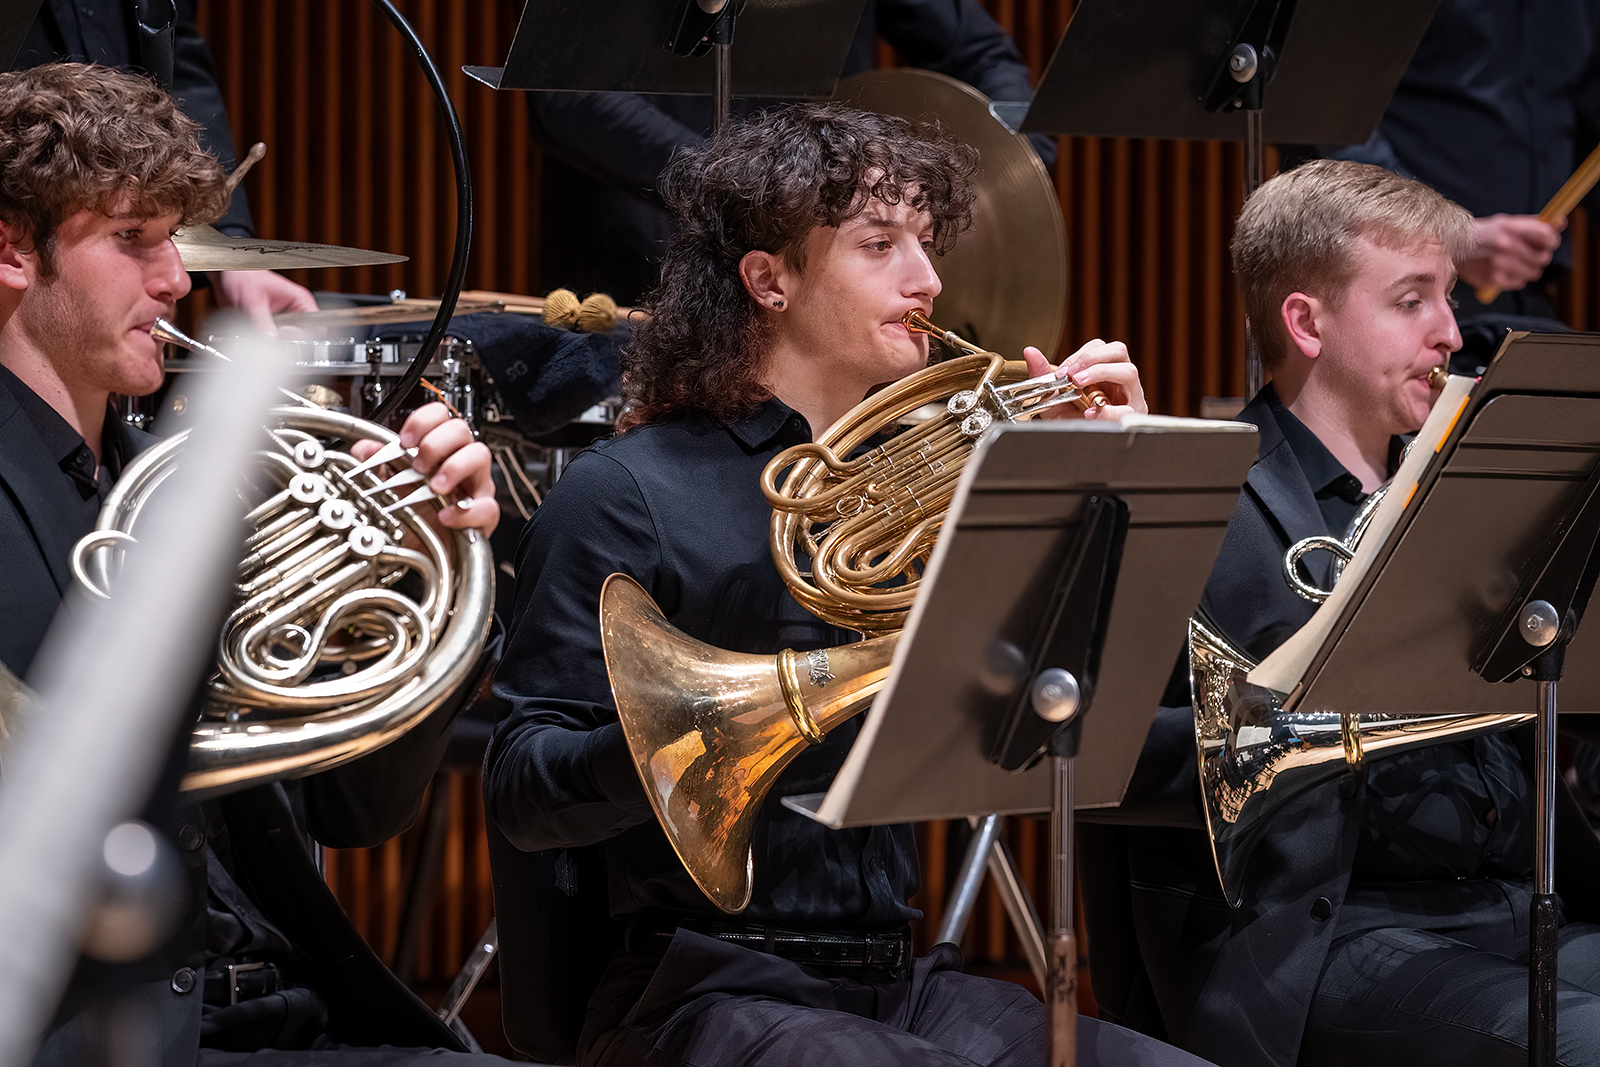 Members of the UMD Wind Orchestra play instruments during a concert.